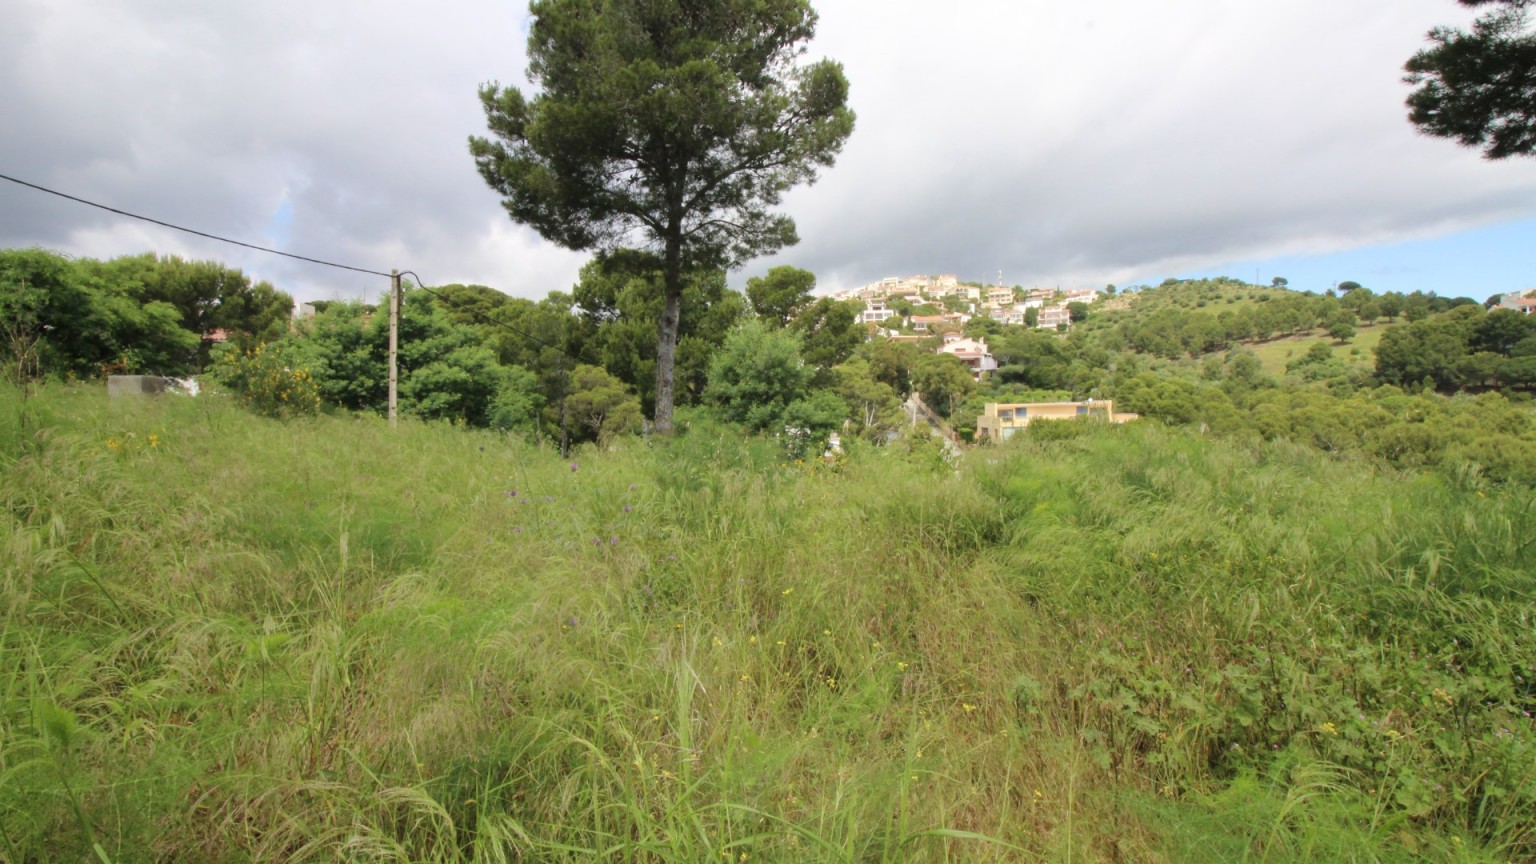 Plot for sale in the nice area of Cap Ras. Ready to build